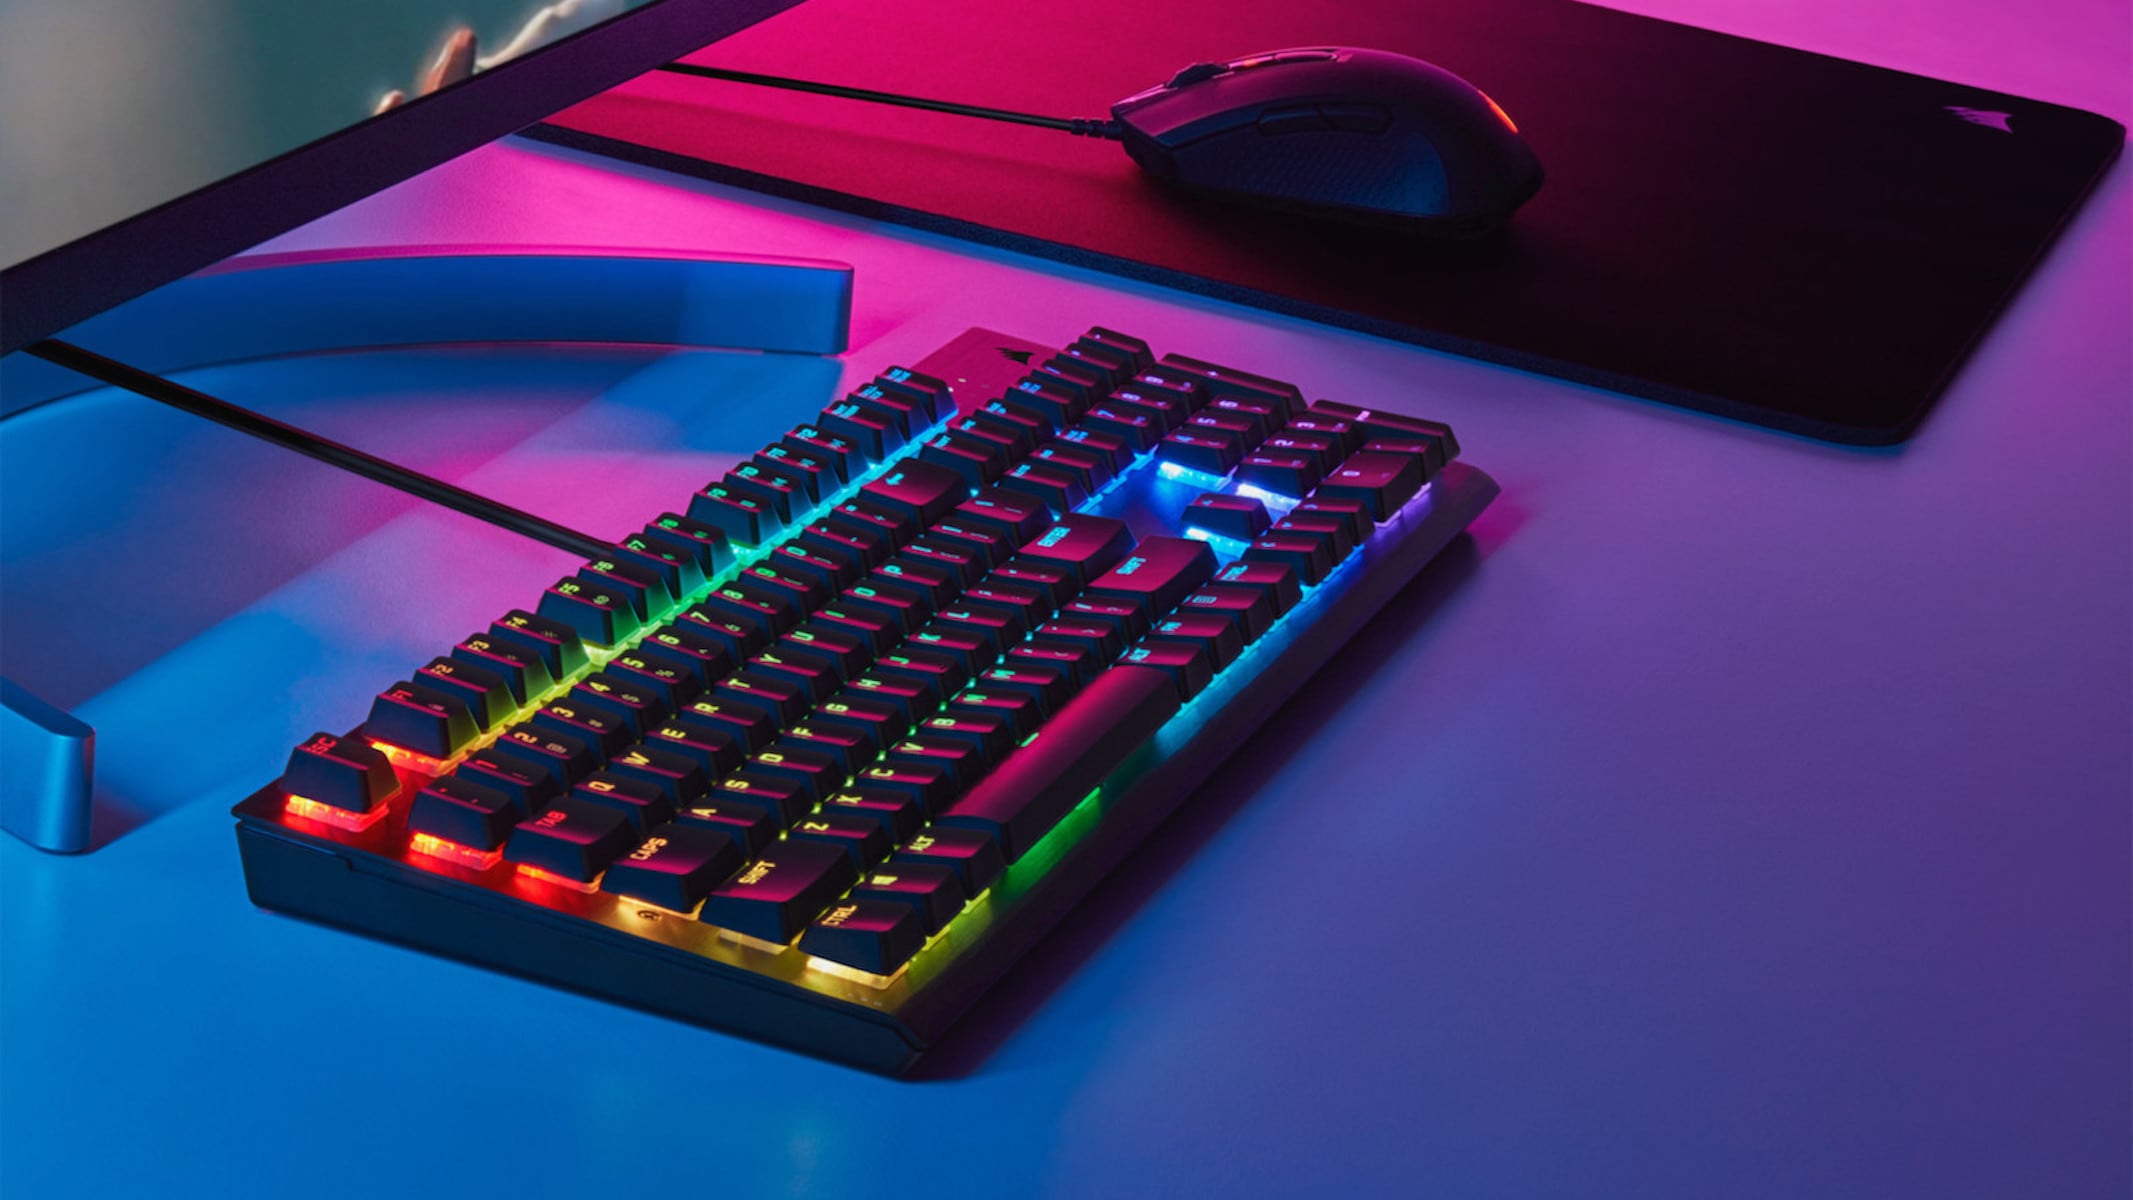 Magazijn kast video 5 of the best gaming keyboards to buy now » Gadget Flow